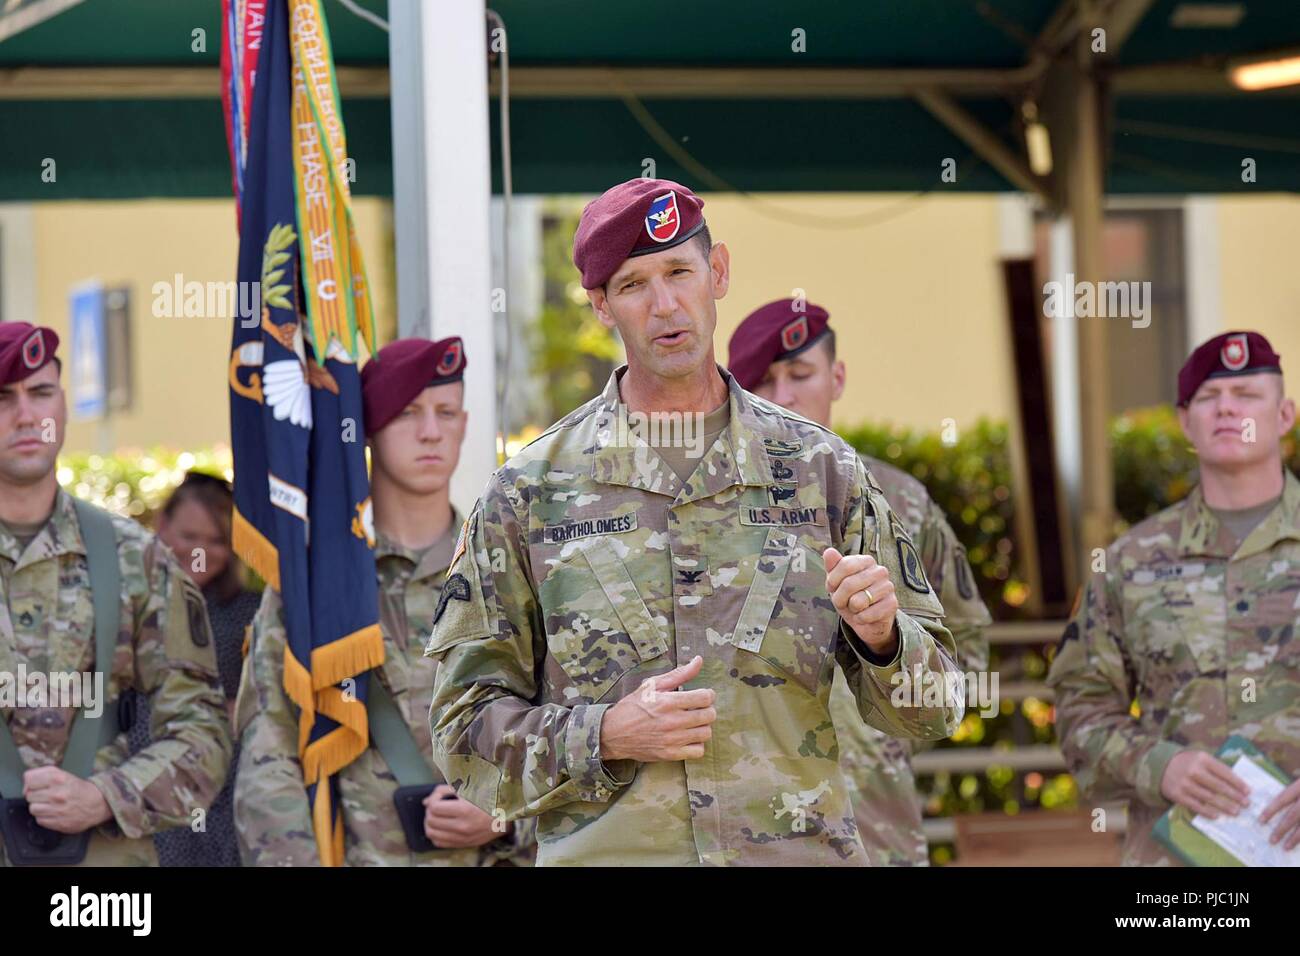 U.S. Army Col James B. Bartholomees III, commander of the 173rd Airborne Brigade, provides remarks prior to the 1st Battalion, 503rd Infantry Regiment, 173rd Airborne Brigade change of responsibility ceremony, at Caserma Ederle in Vicenza, Italy, July 19, 2018. The 173rd Airborne Brigade is the U.S. Army Contingency Response Force in Europe, capable of projecting ready forces anywhere in the U.S. European, Africa or Central Commands' areas of responsibility. Stock Photo